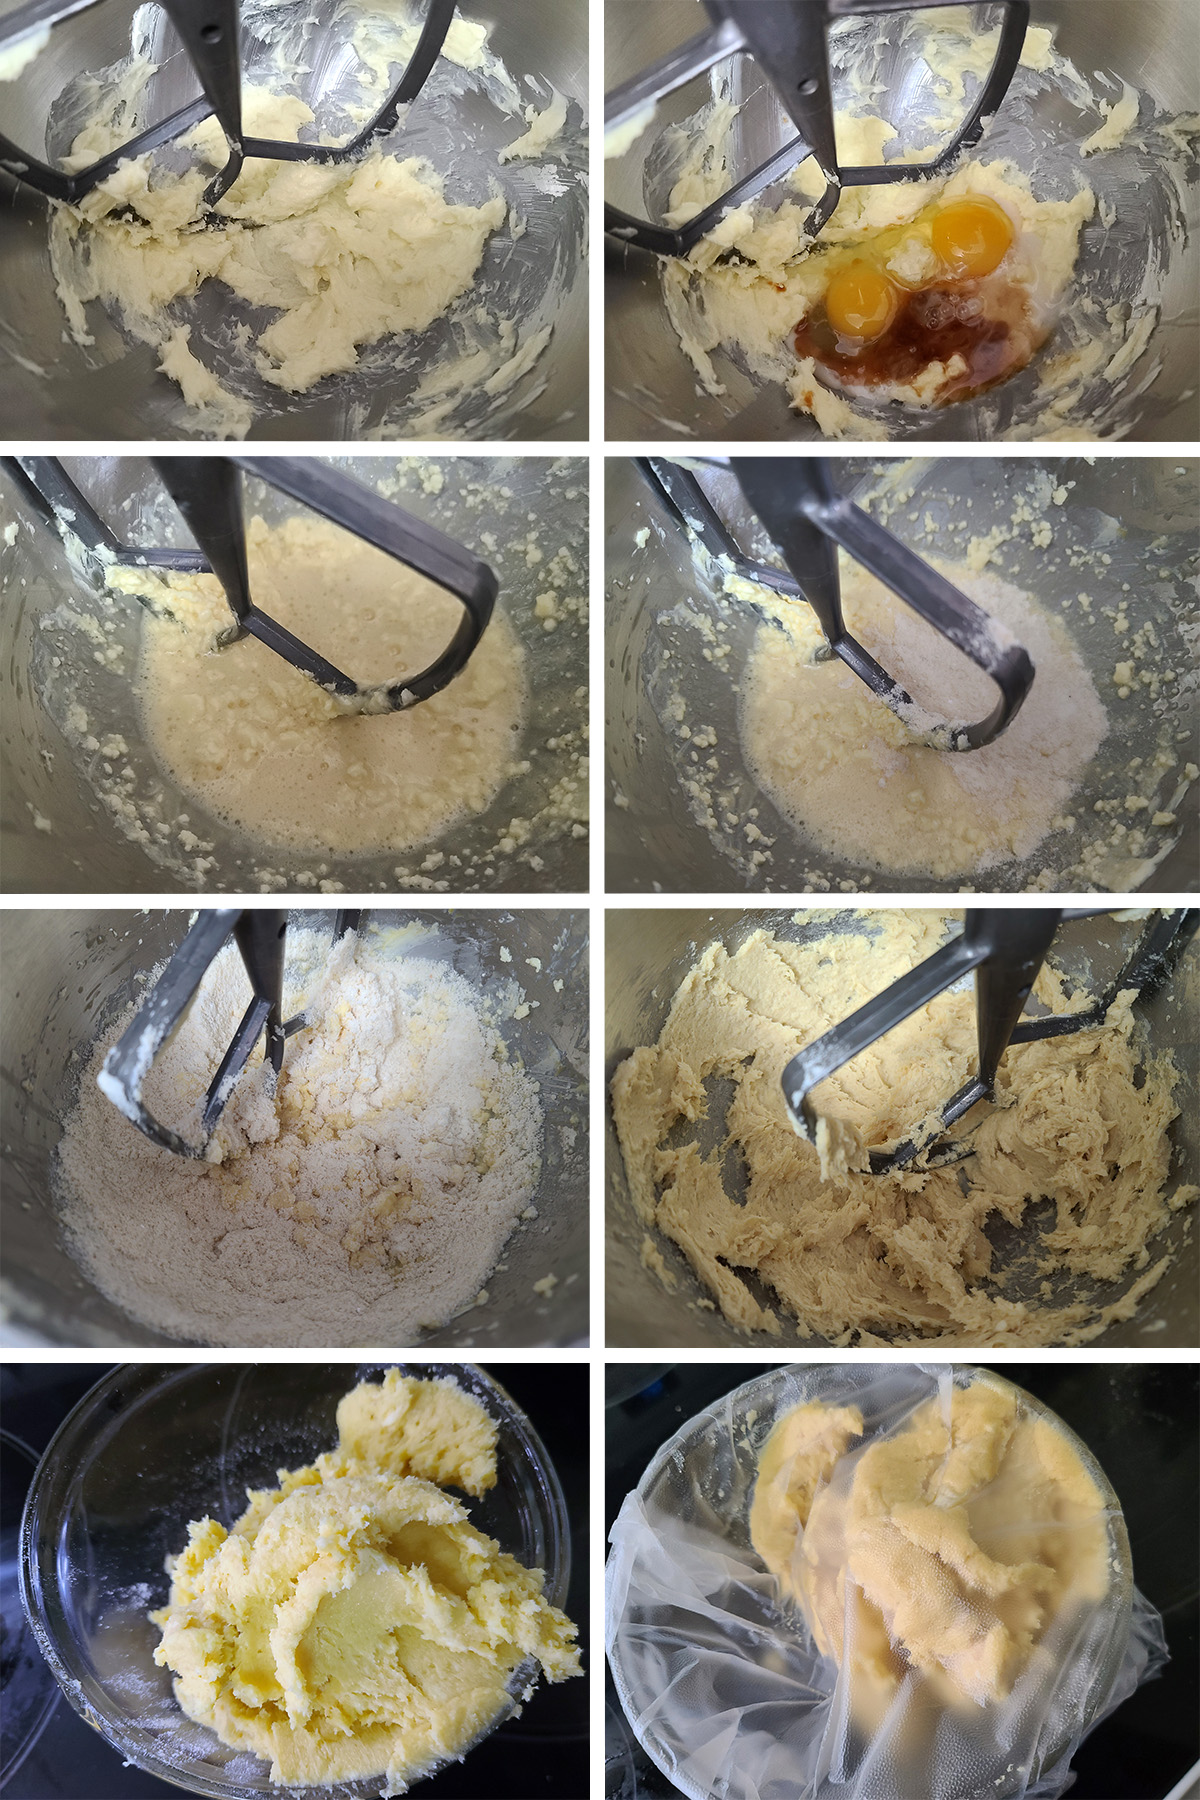 An 8 part image showing the dough being made, as described.